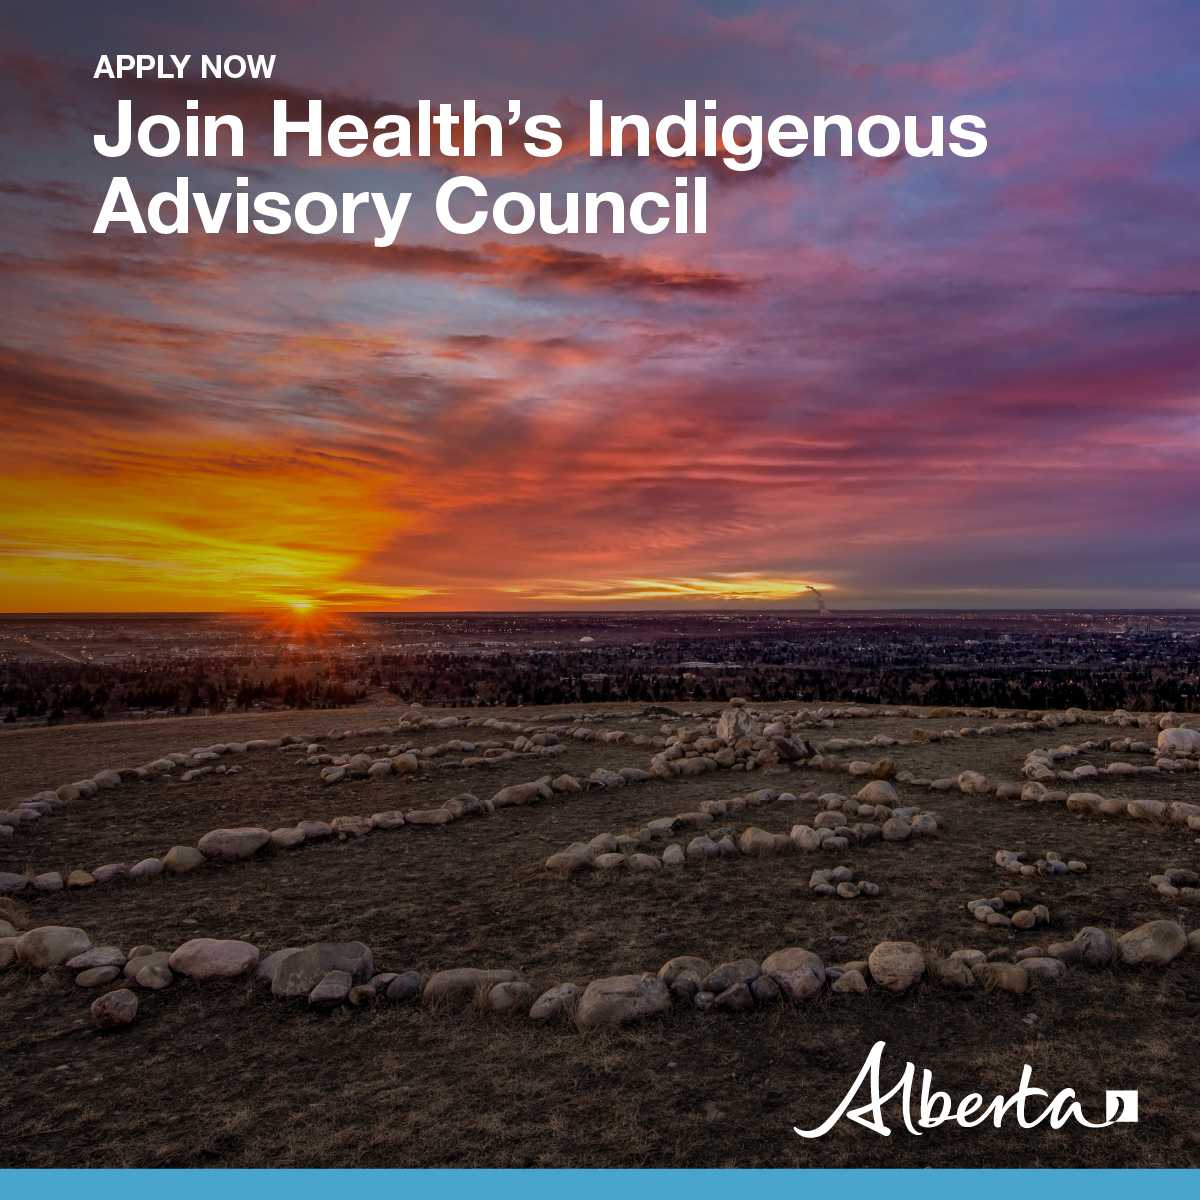 A dedicated Indigenous Advisory Council will amplify the voices of First Nation, Métis and Inuit communities and inform the design and delivery of culturally appropriate health care. Apply to be a part of the Indigenous Advisory Council at your.alberta.ca/advisory-counc…